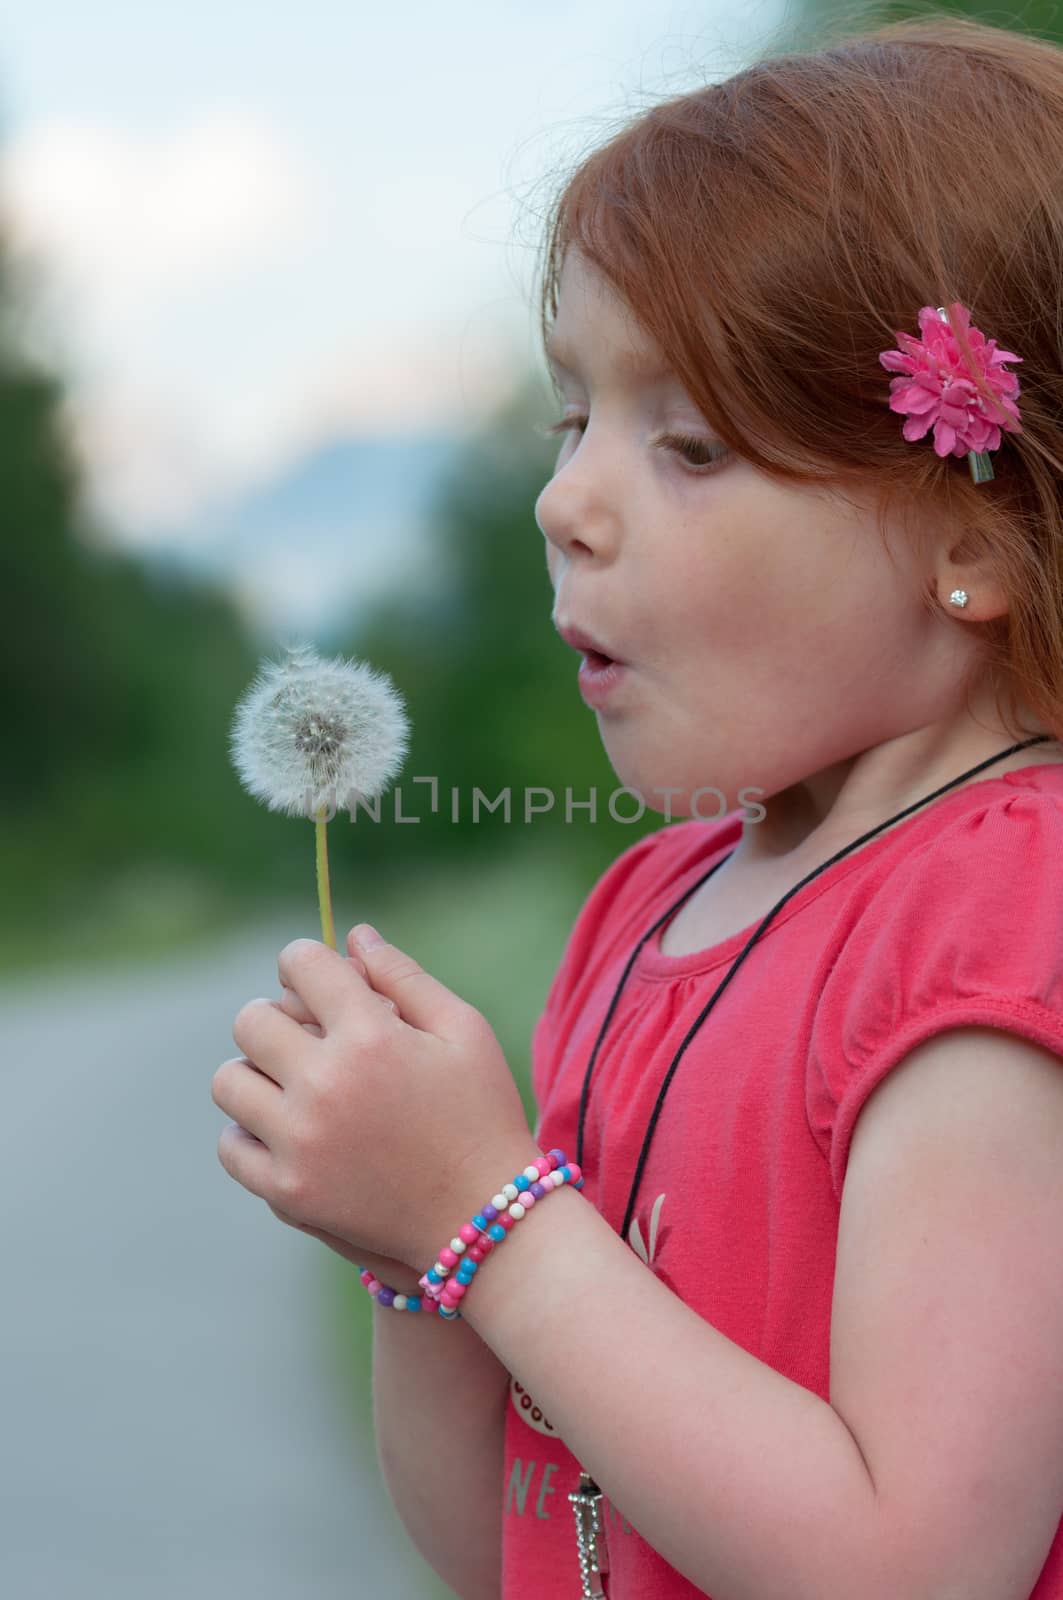 Red hair child blows on a flower by easyclickshop